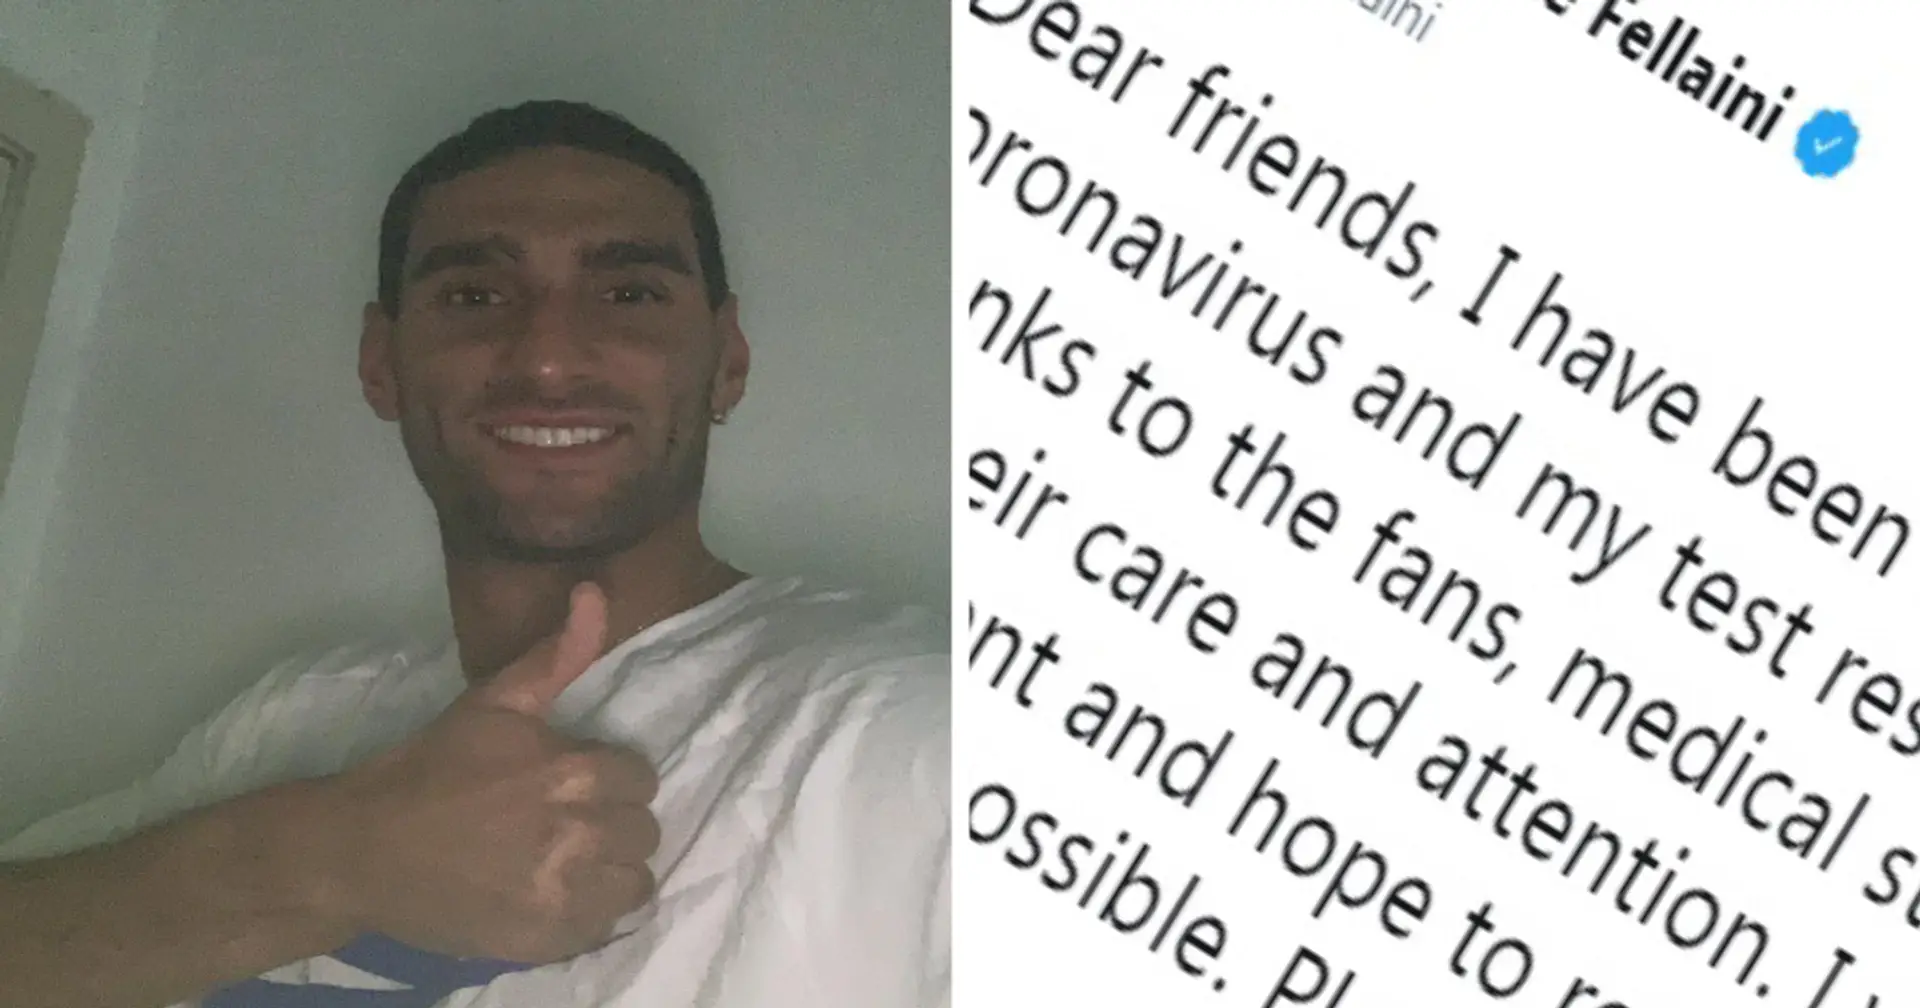 Marouane Fellaini issues coronavirus statement: 'I will follow the treatment and hope to return to the game as soon as possible'